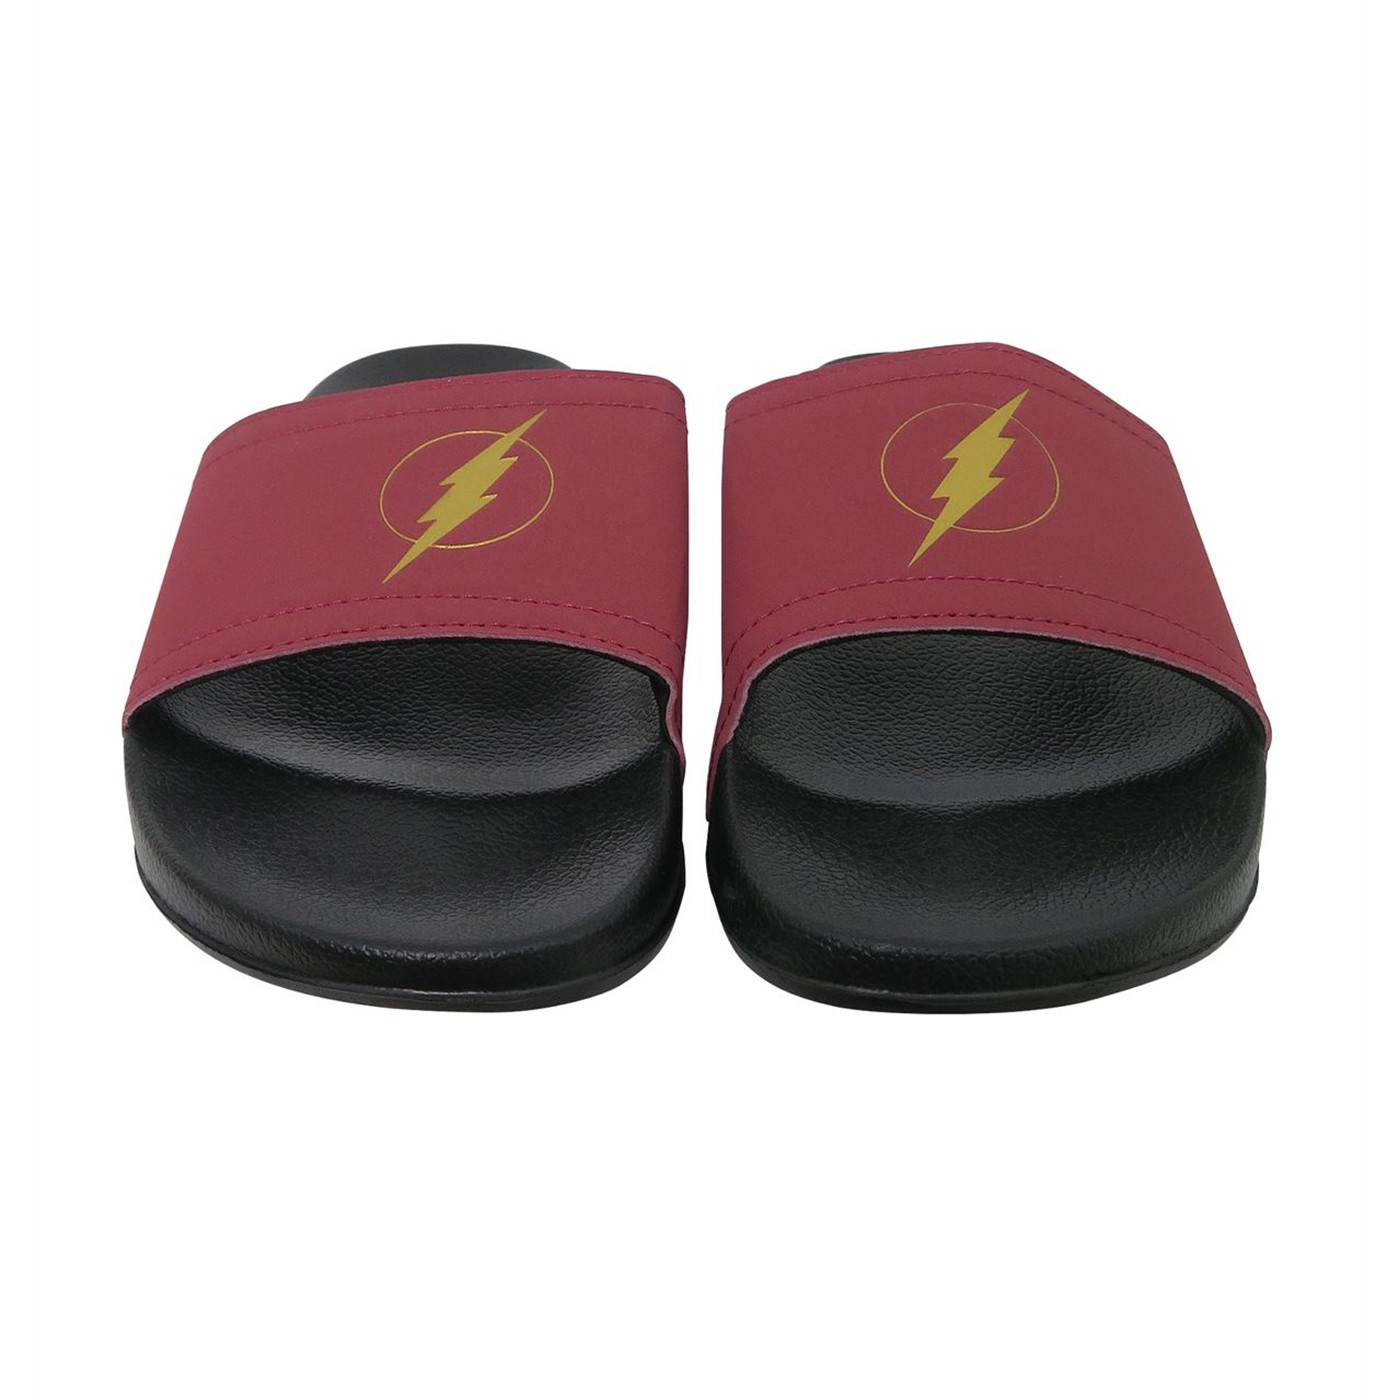 The Flash Slide-in Sandals